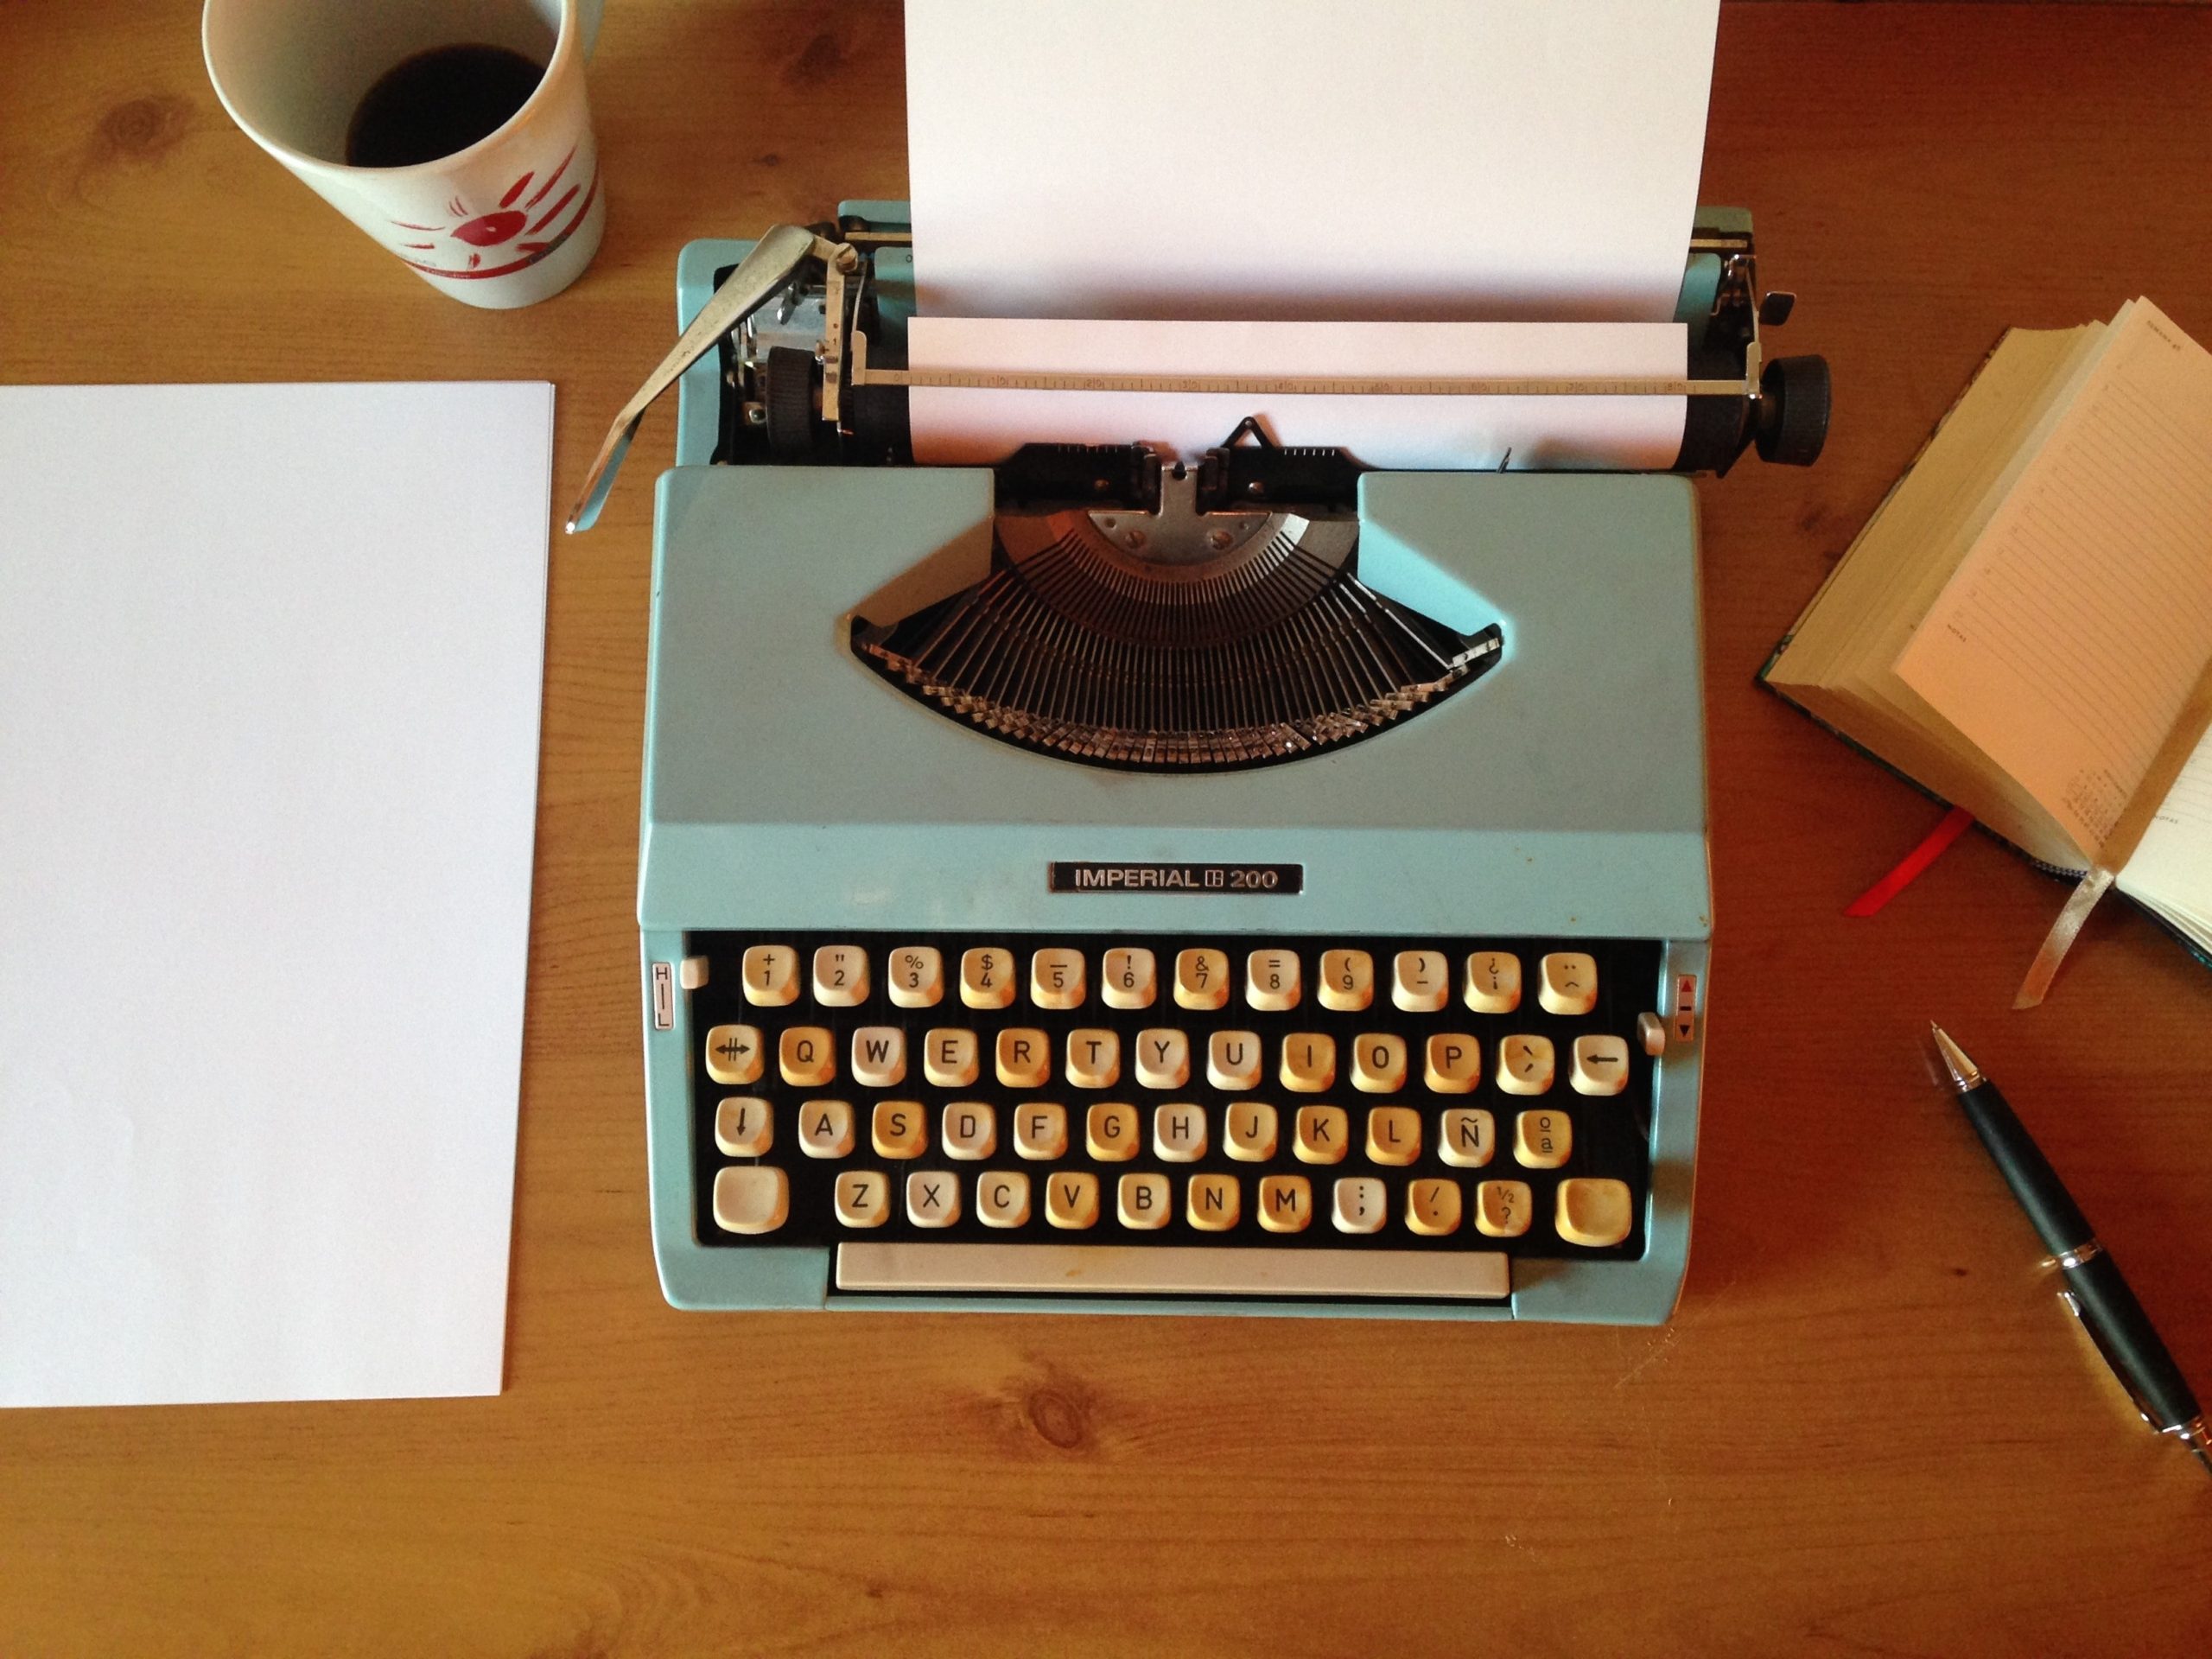 Why a writer hired me, a freelance writer, to write her cover letter